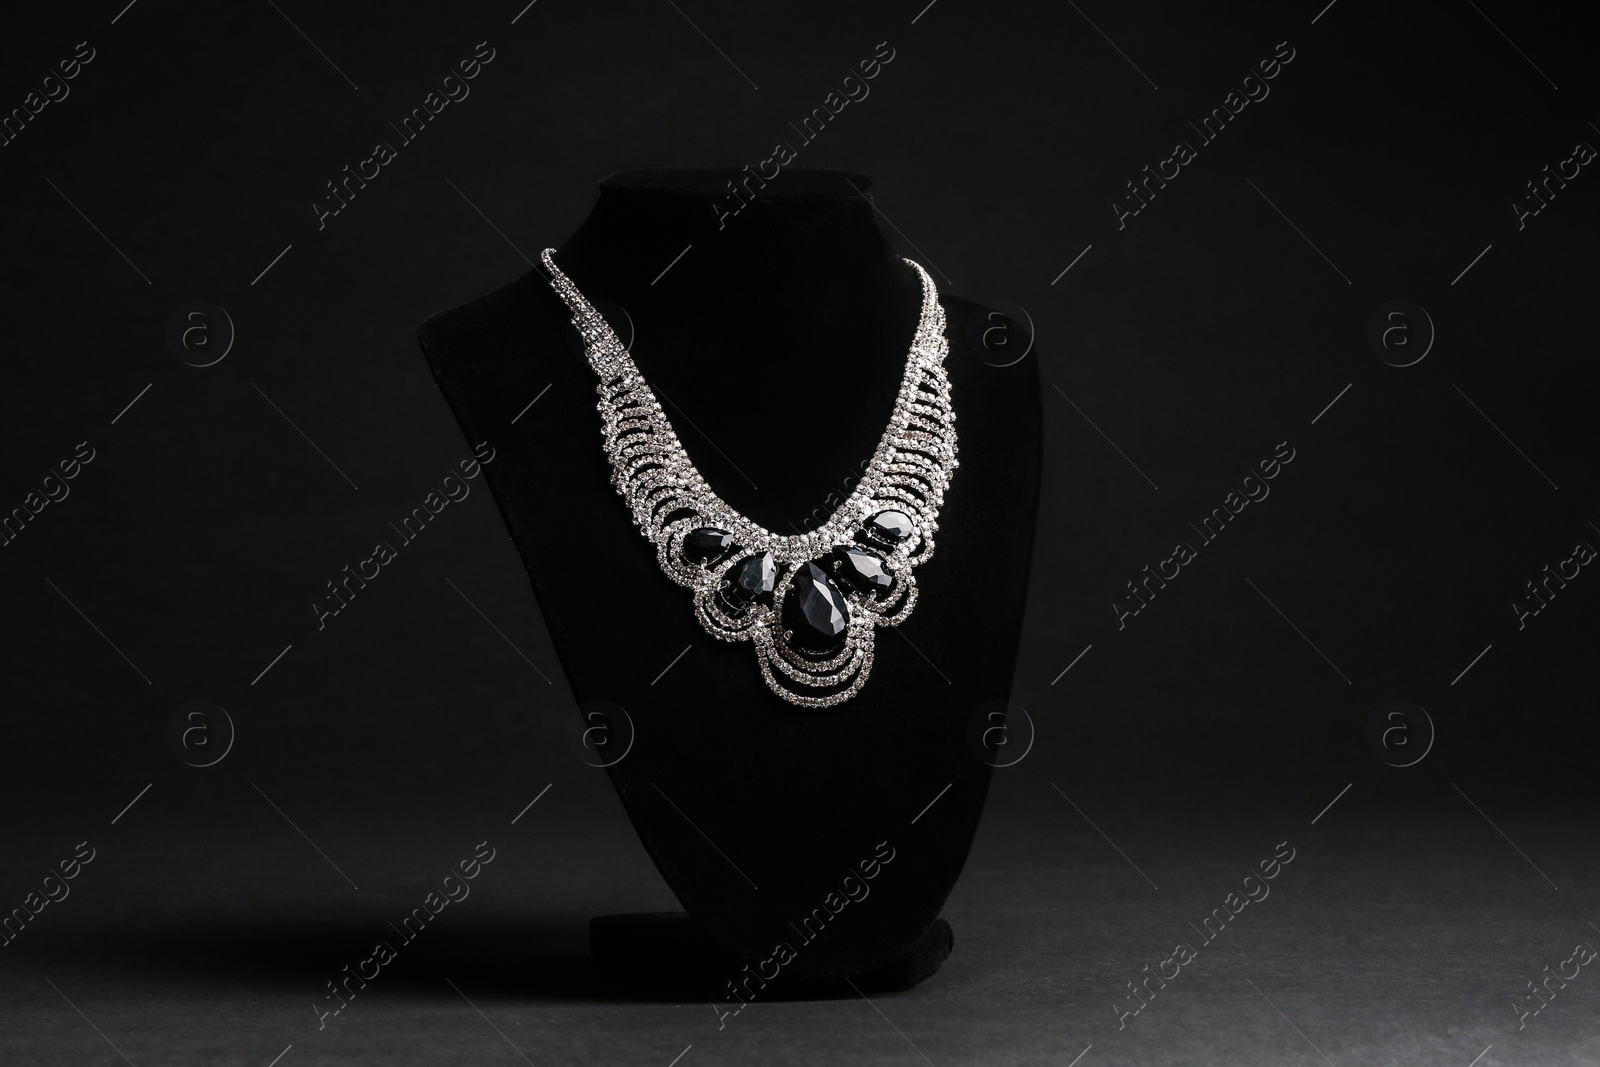 Photo of Elegant necklace on stand against black background. Luxury jewelry